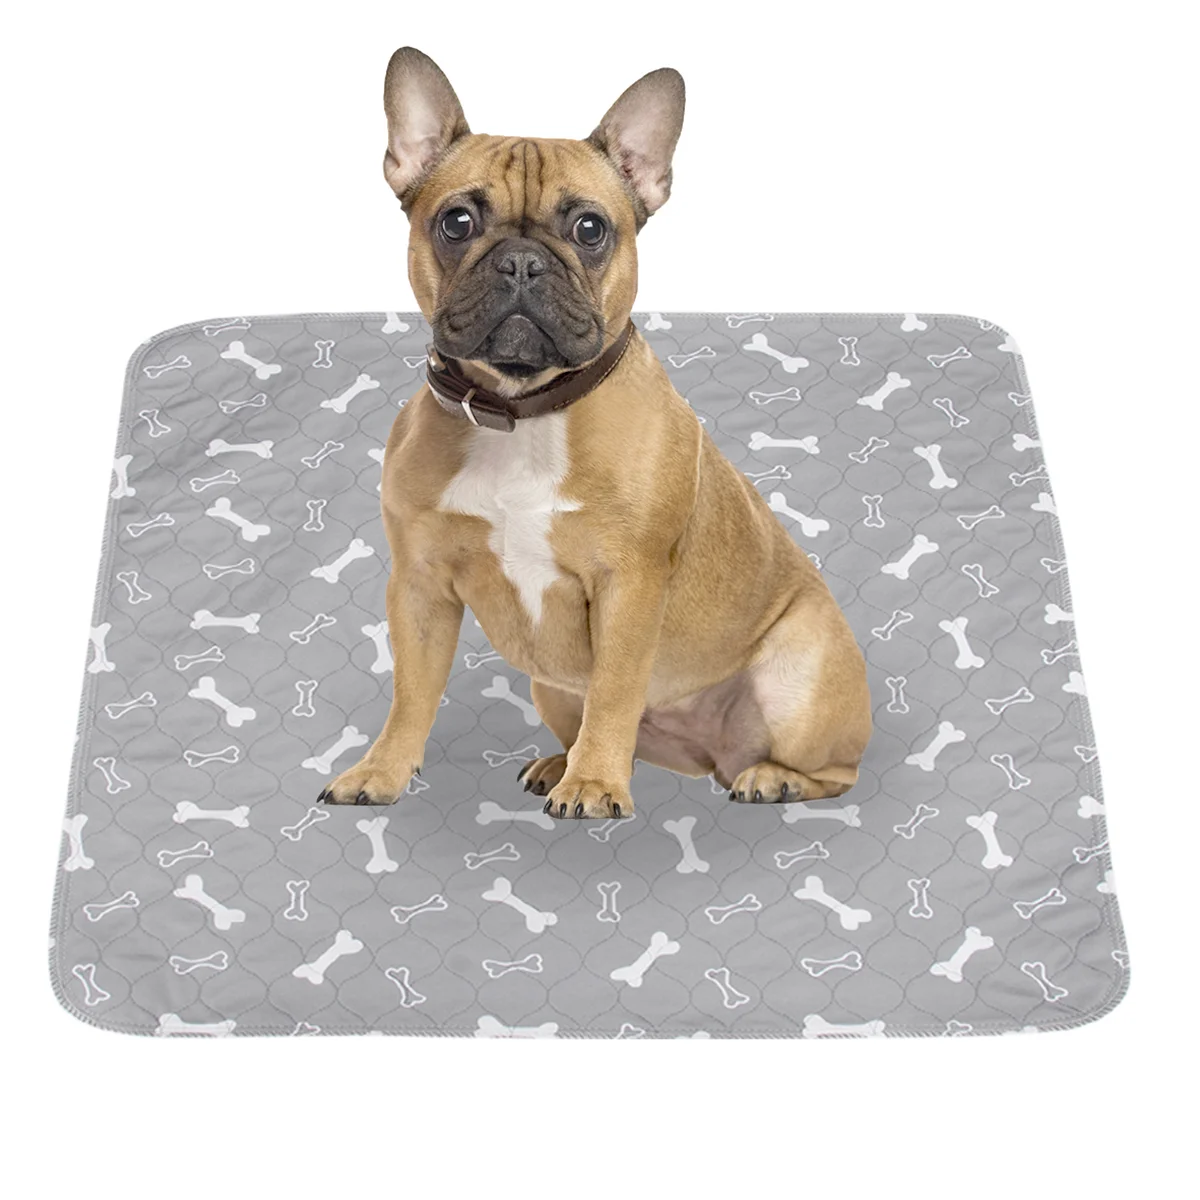 

Training Mat Dog Pee Pads Puppy Simple Solution Extra Large Leaks No More Dogs Puppies Pet Doggy Diapers Crate Absorbant Bib